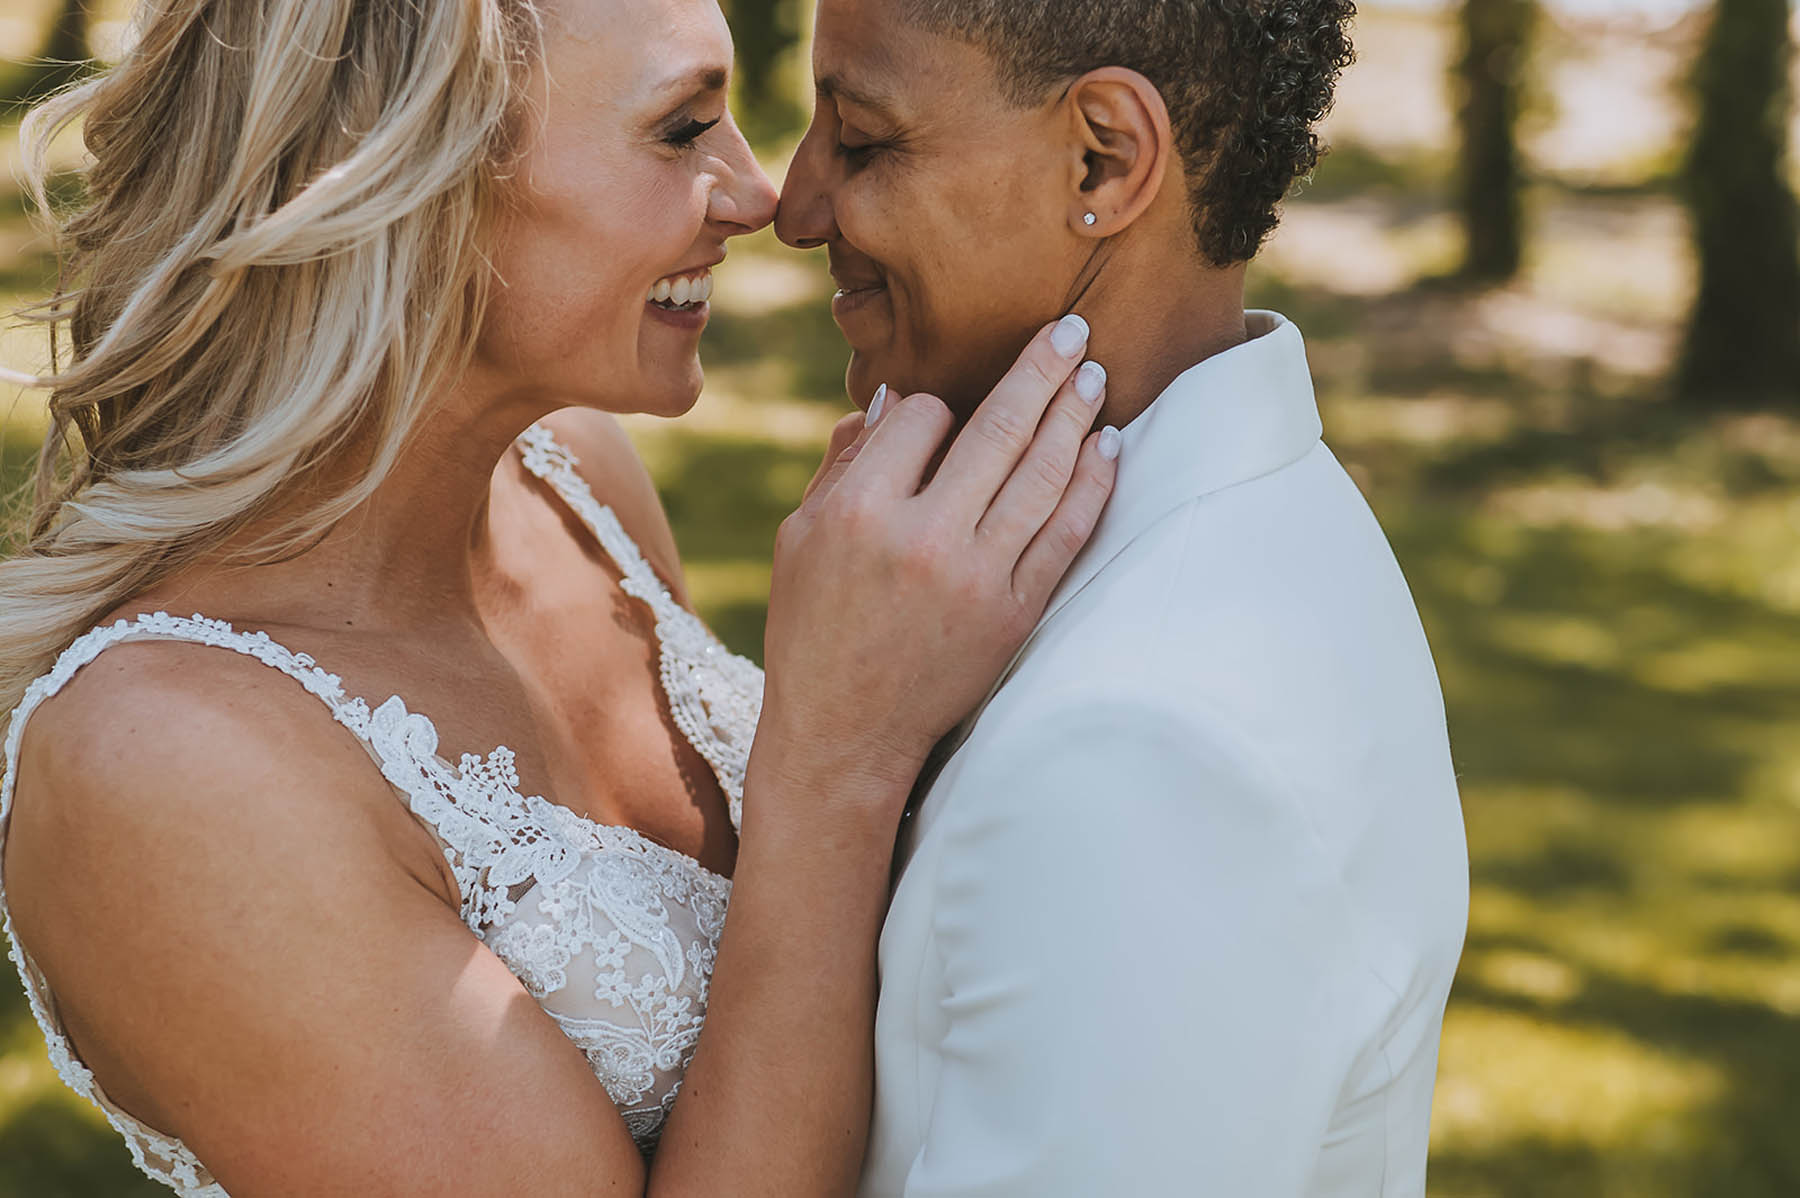 An interracial couple embraces, noses touching, in their white wedding attire.